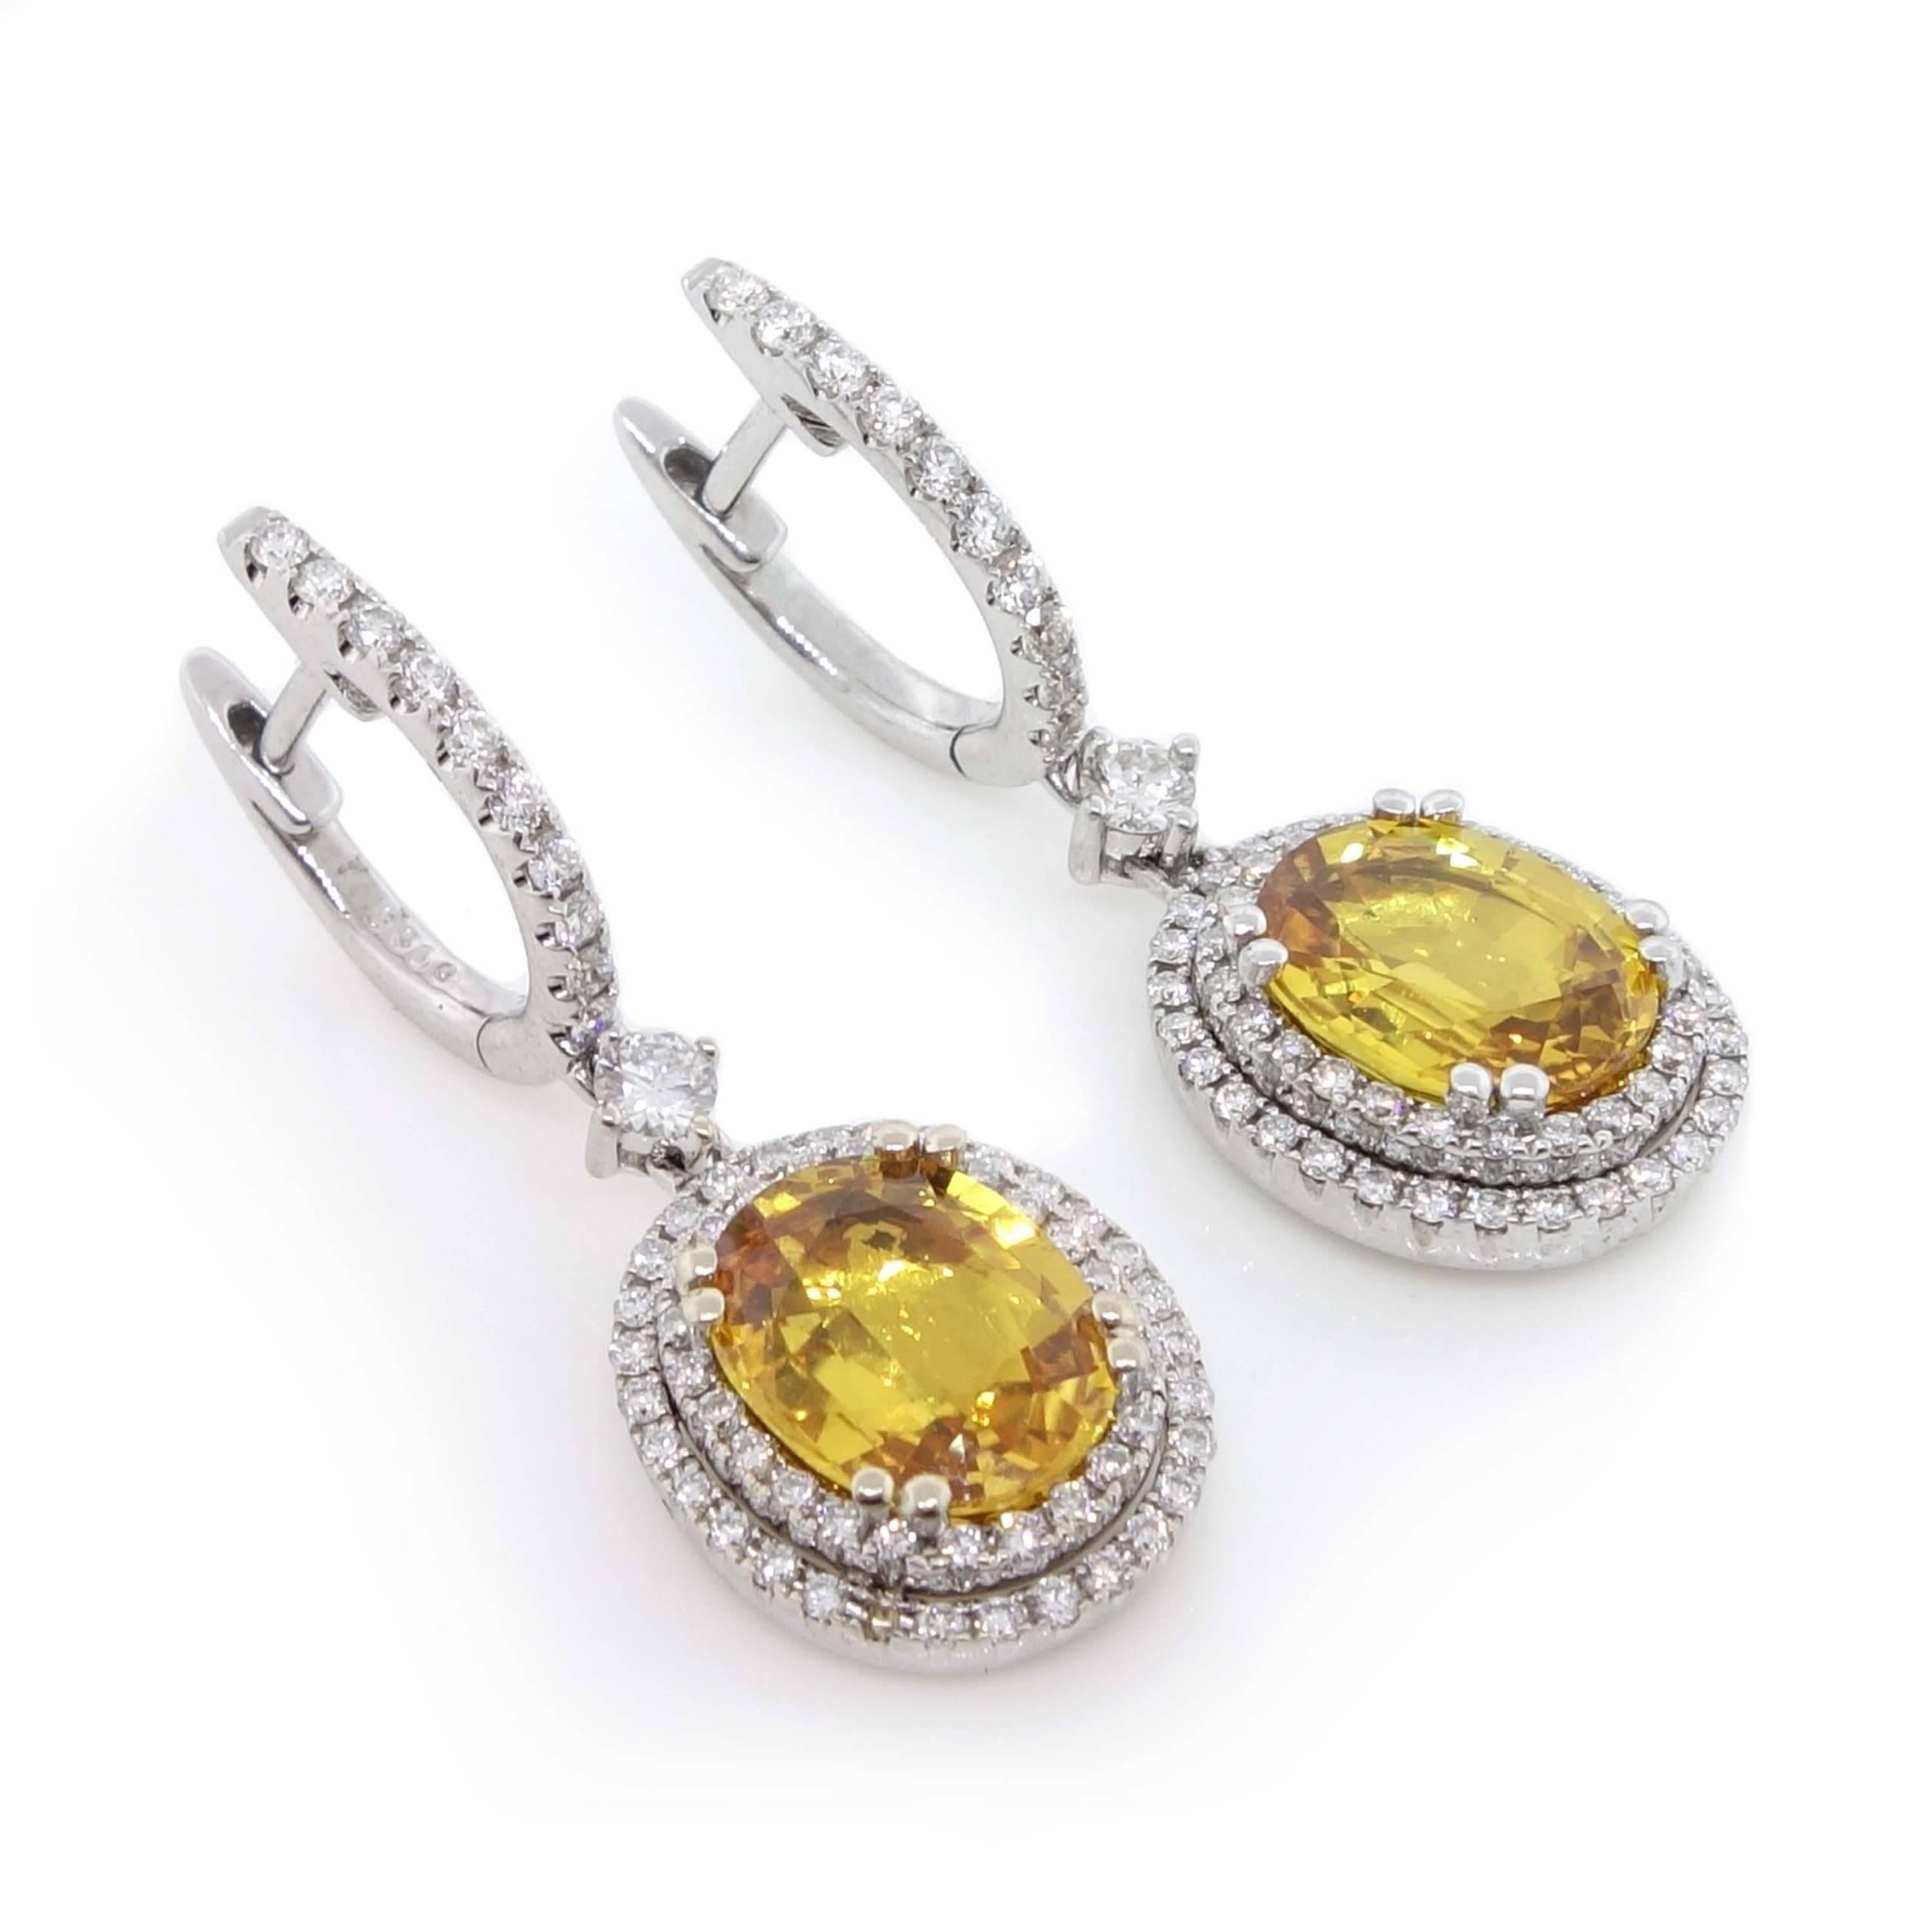 Dangle earrings containing 2 fine yellow oval Sapphires of about 5.81 carats measuring approximately 9.86×7.78×3.80mm and 9.74×7.80×3.76mm. The sapphires are surrounded by 128 round brilliant cut Diamonds of about 0.90 carats. It also contains 2